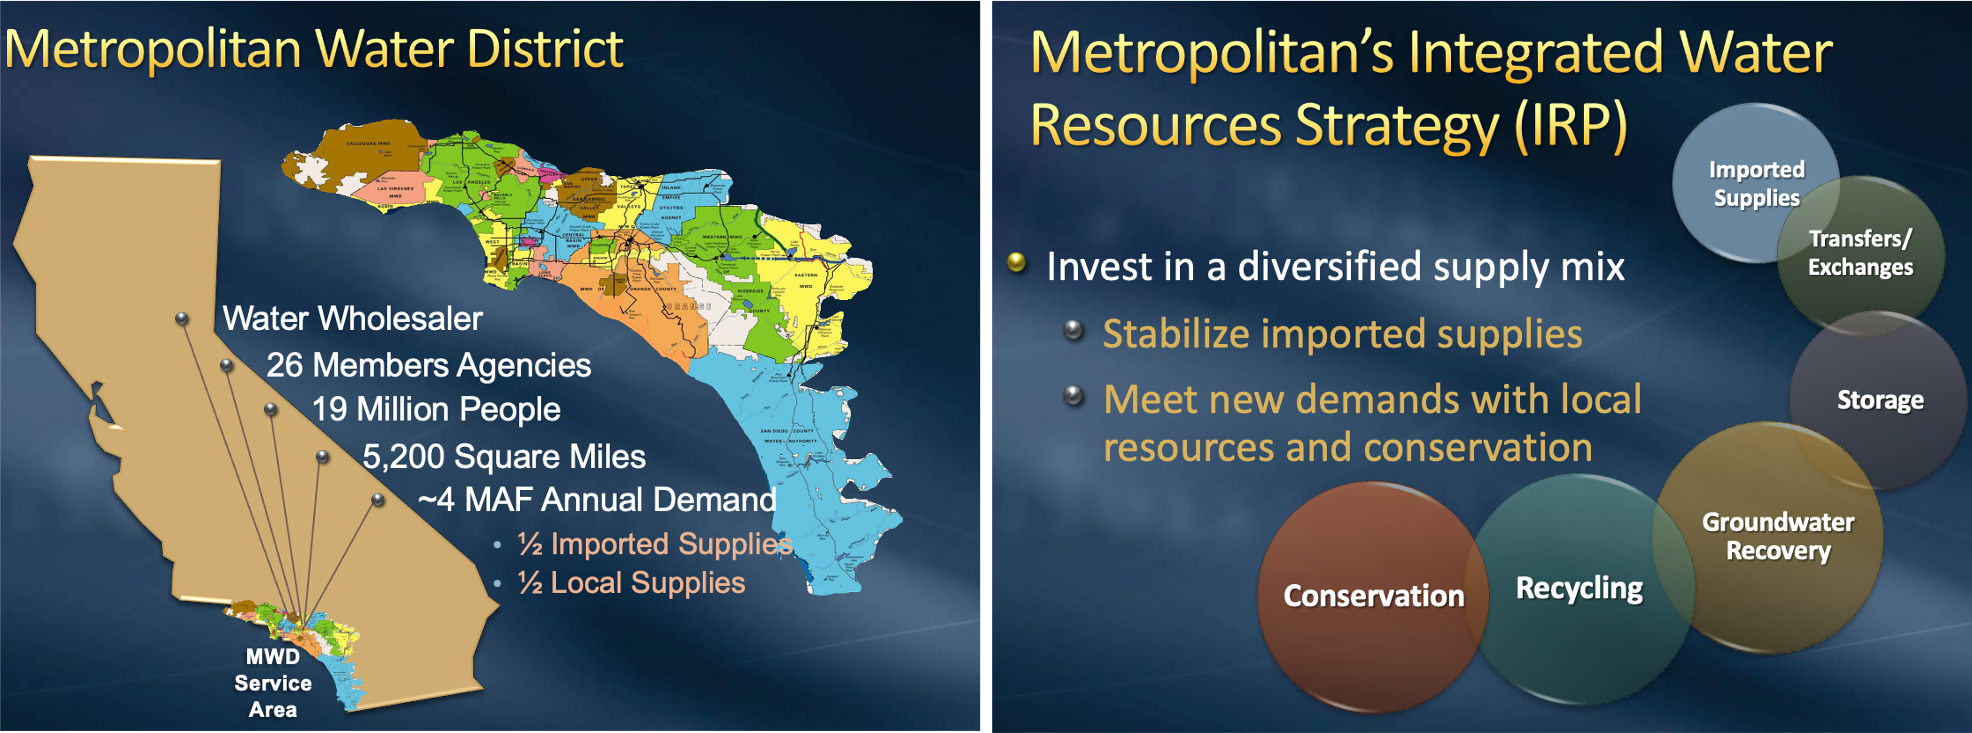 metropolitan-water-district-overview-u-s-climate-resilience-toolkit